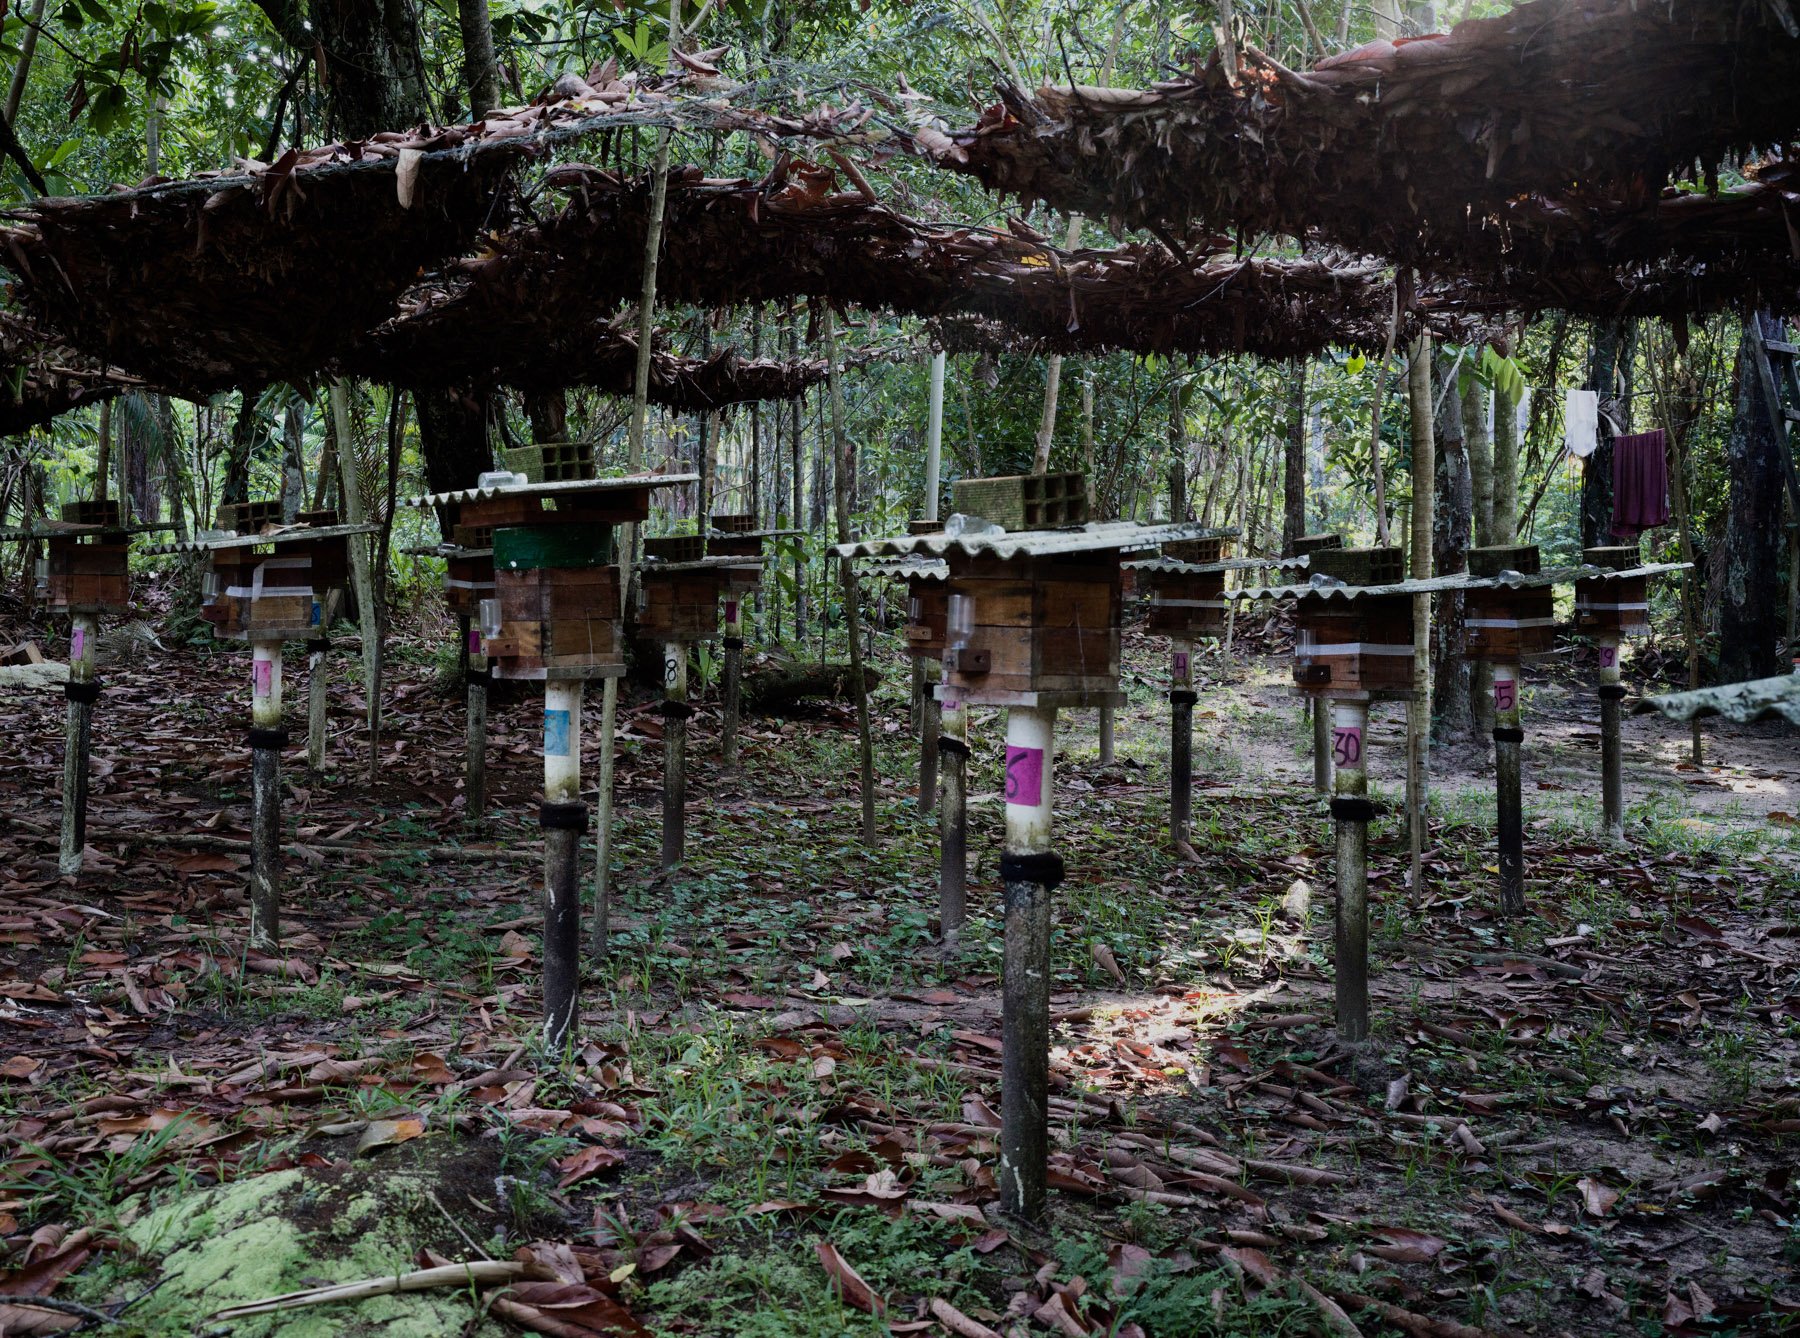  Boa Vista Da Acará, 2023. A view of the NGO meliponary used to duplicate the stingless bees colonies. A reproduction meliponary is foundamental to avaid the capture of wild colonies.Only in this way it is possible to increase the number of stingless